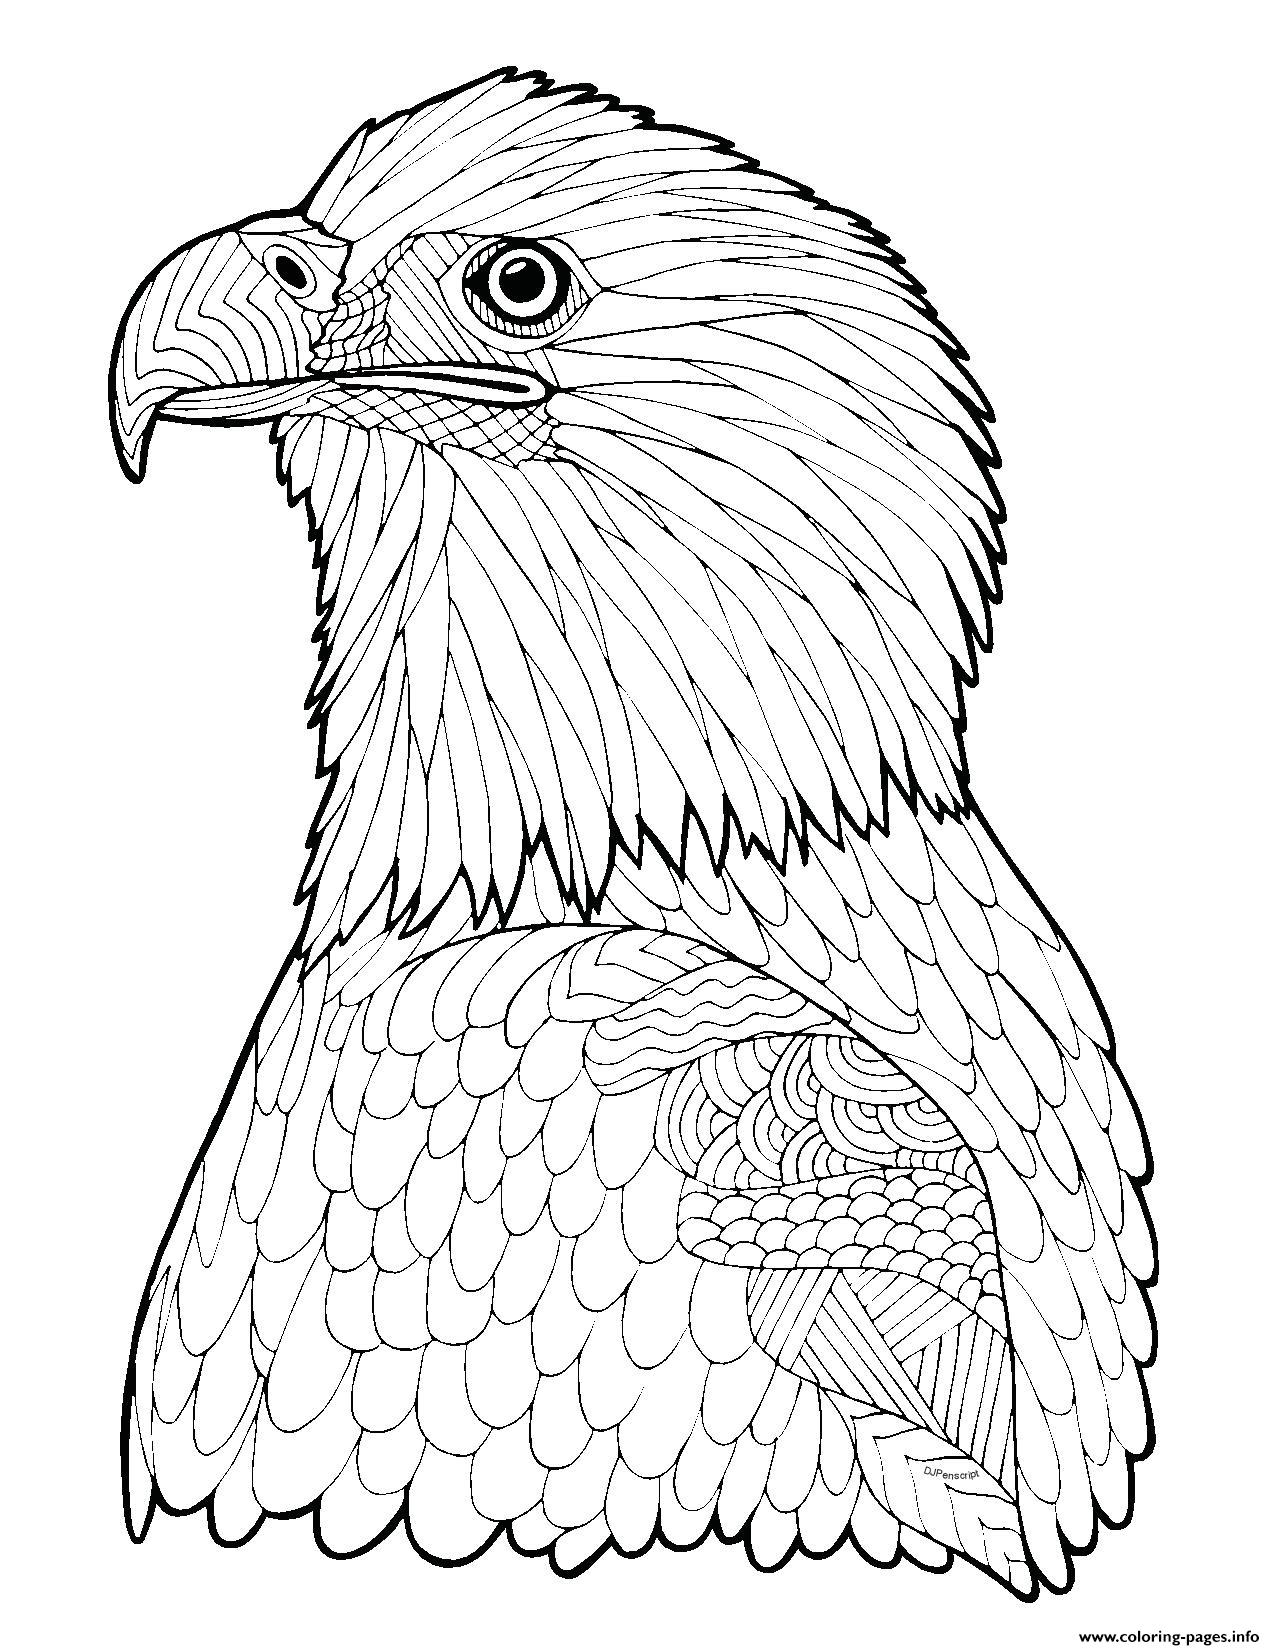 Eagle Coloring Pages For Adults at Free printable